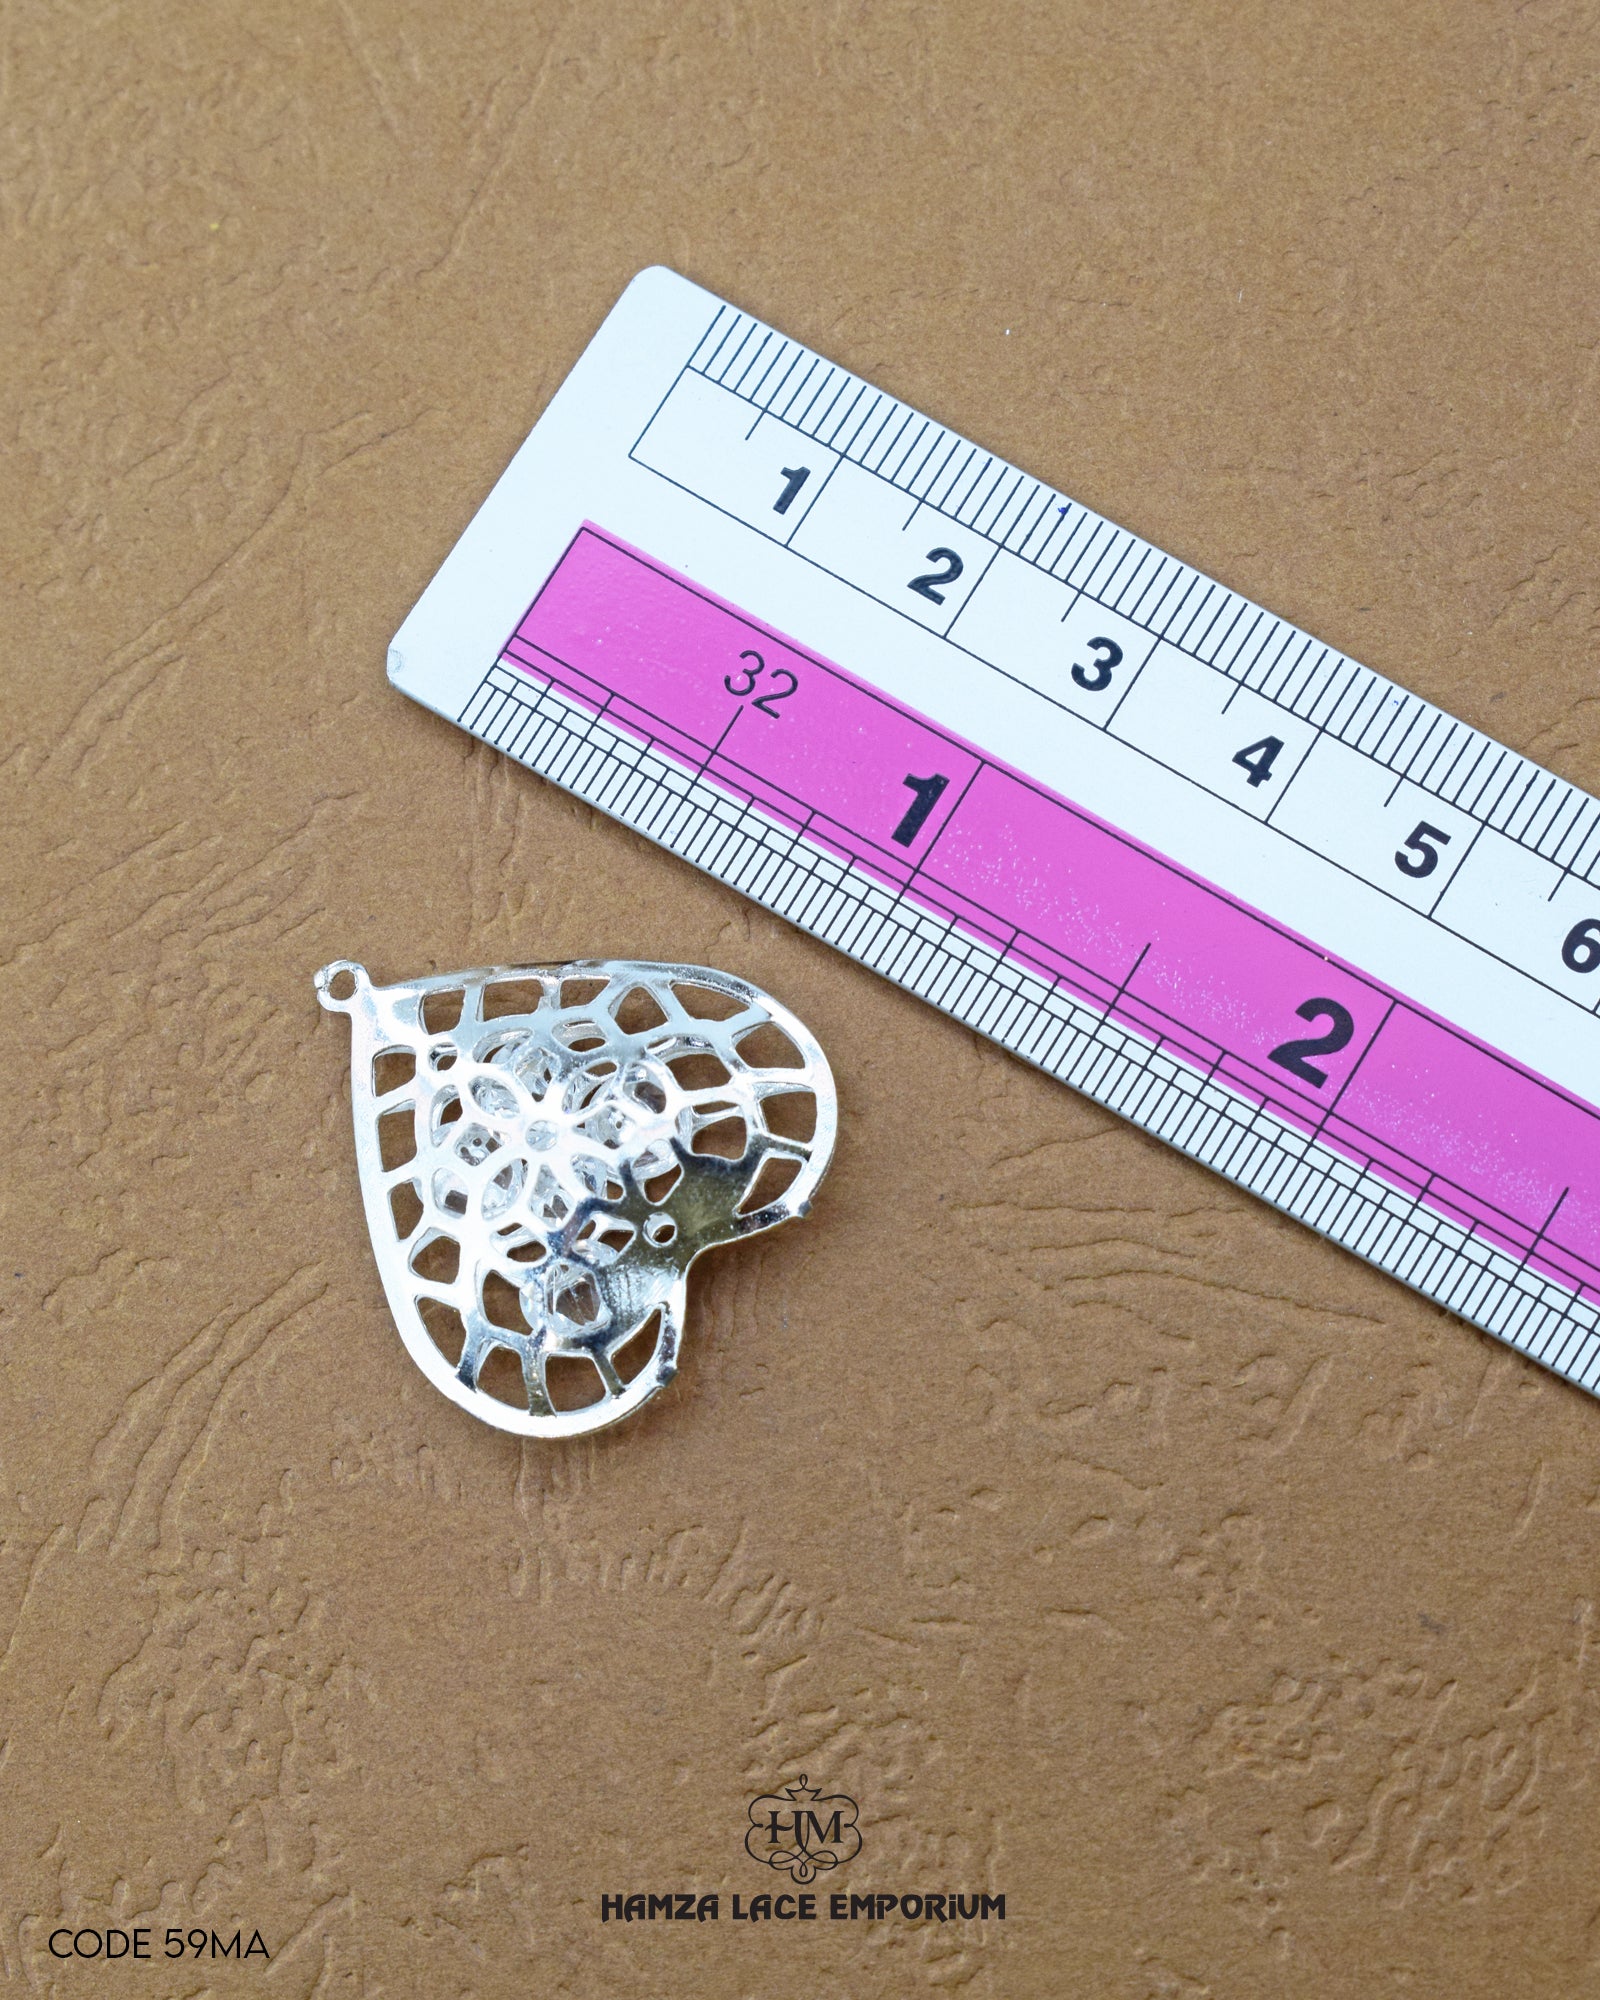 The 'Heart Design Metal Accessory MA77' size is showcased using a ruler for precise measurement.